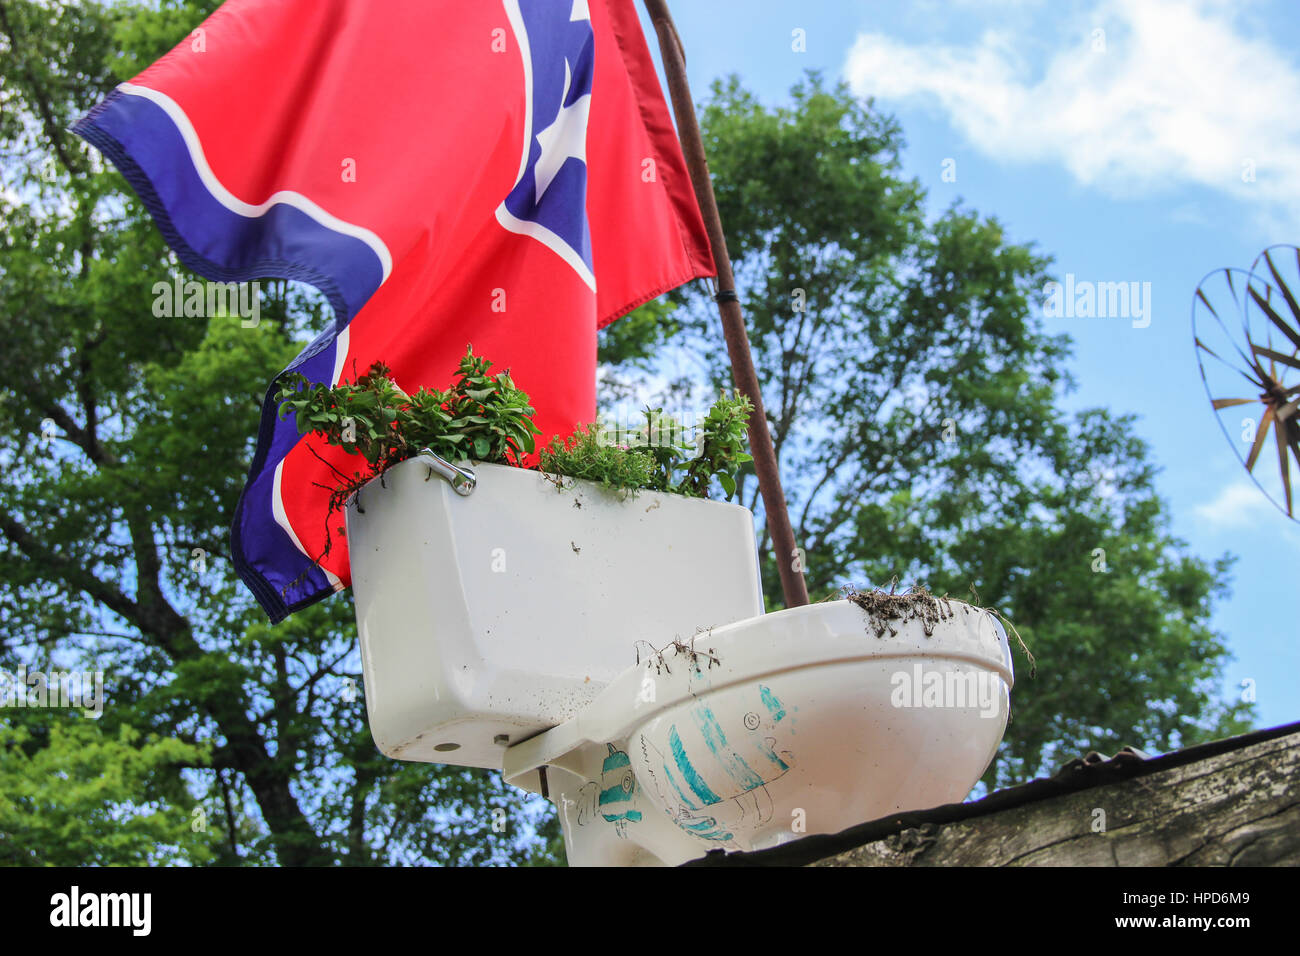 south flag in Tennessee with toilet in garden Stock Photo